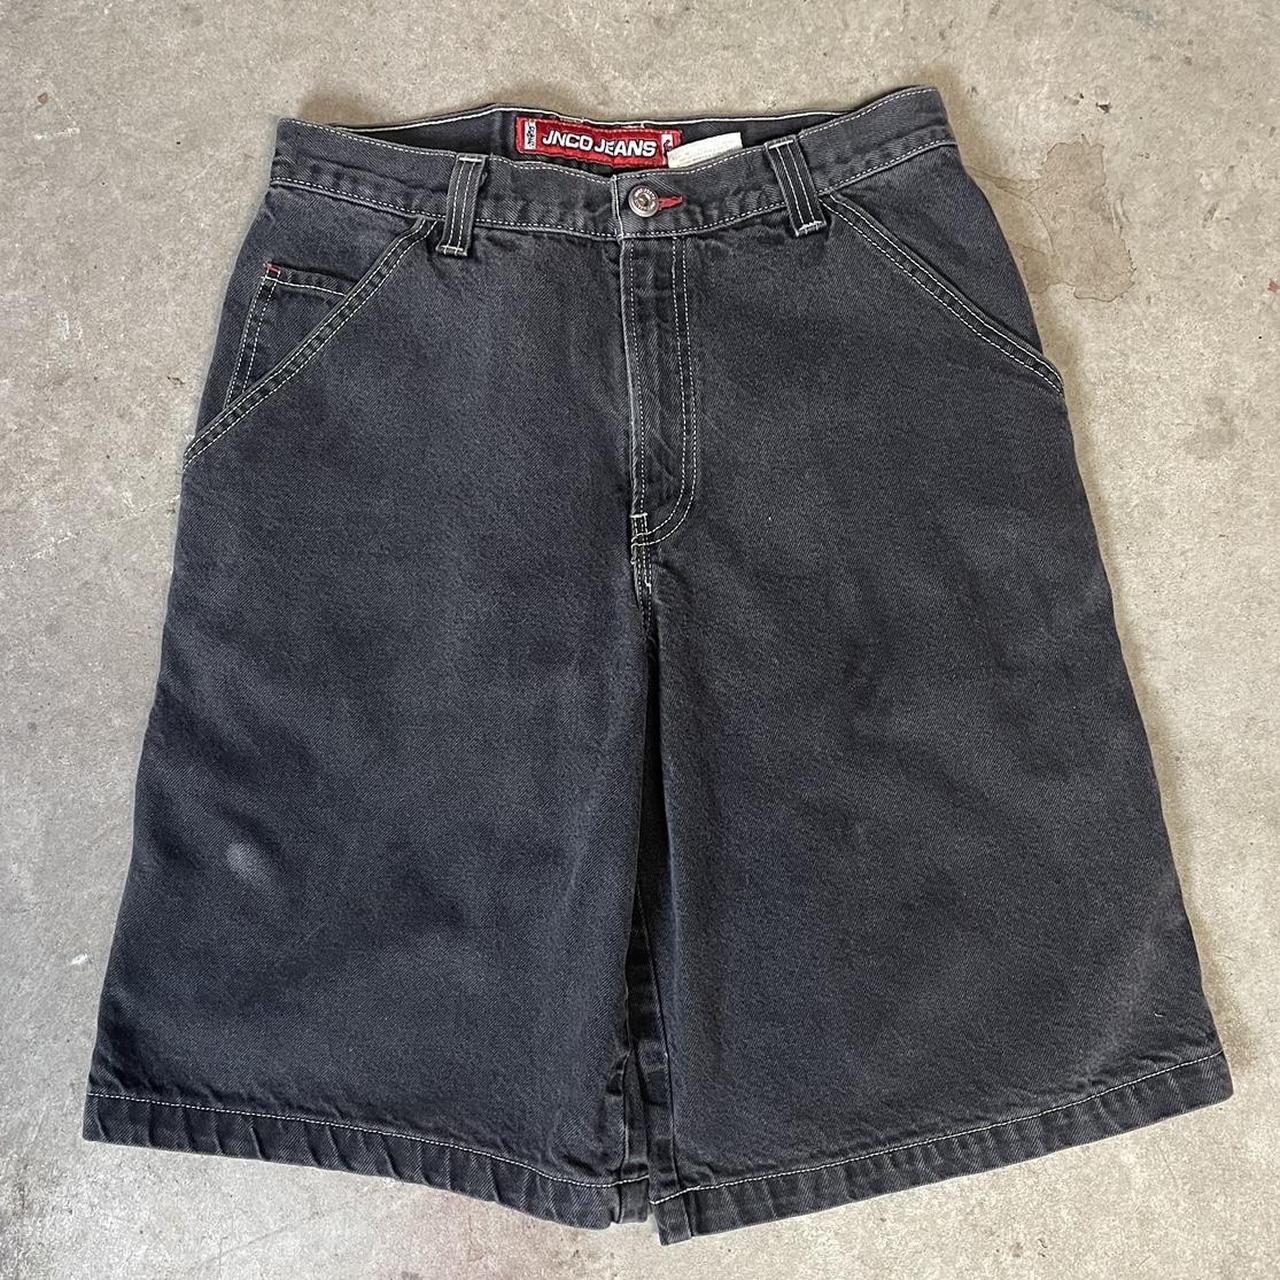 Rare Jnco Embroidered Crown Jean shorts Size 33 in... - Depop